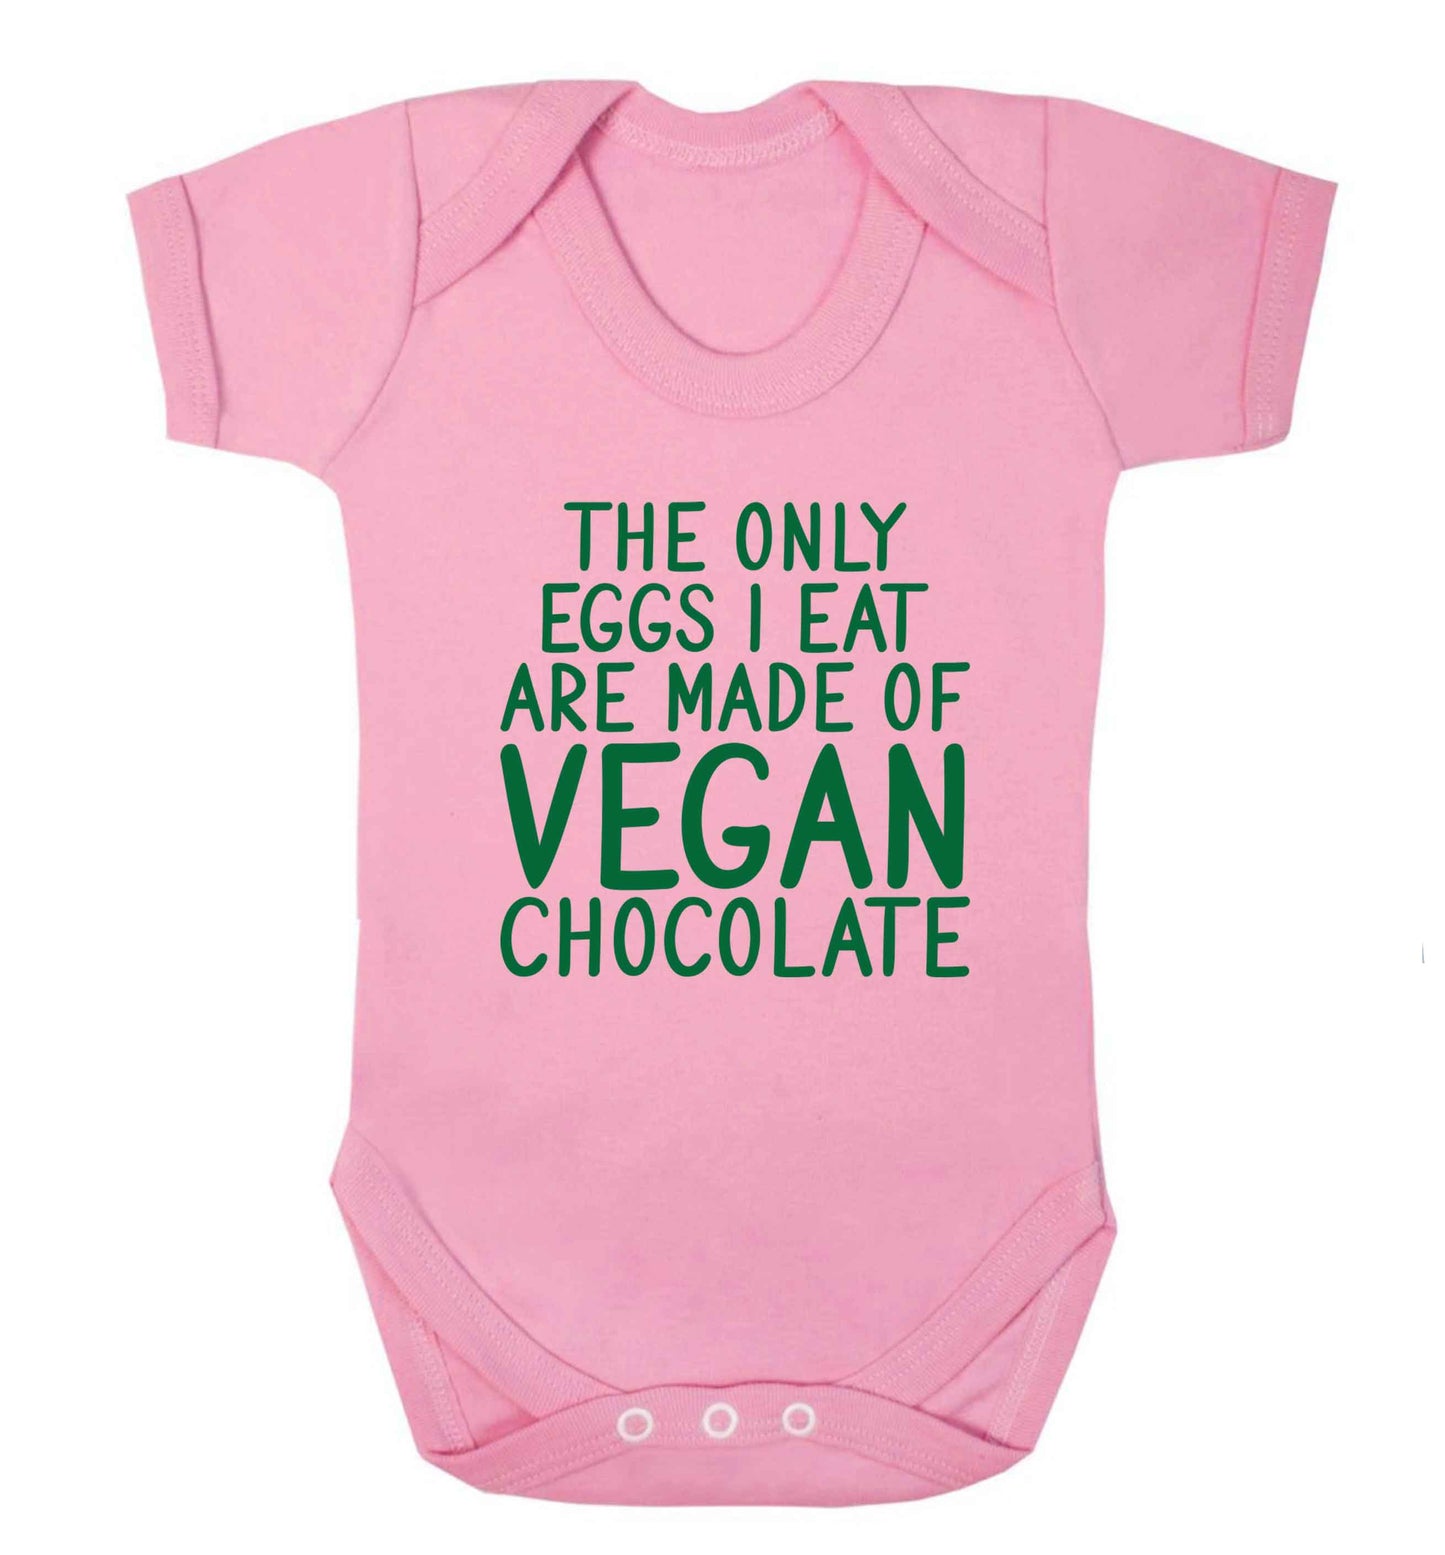 The only eggs I eat are made of vegan chocolate baby vest pale pink 18-24 months